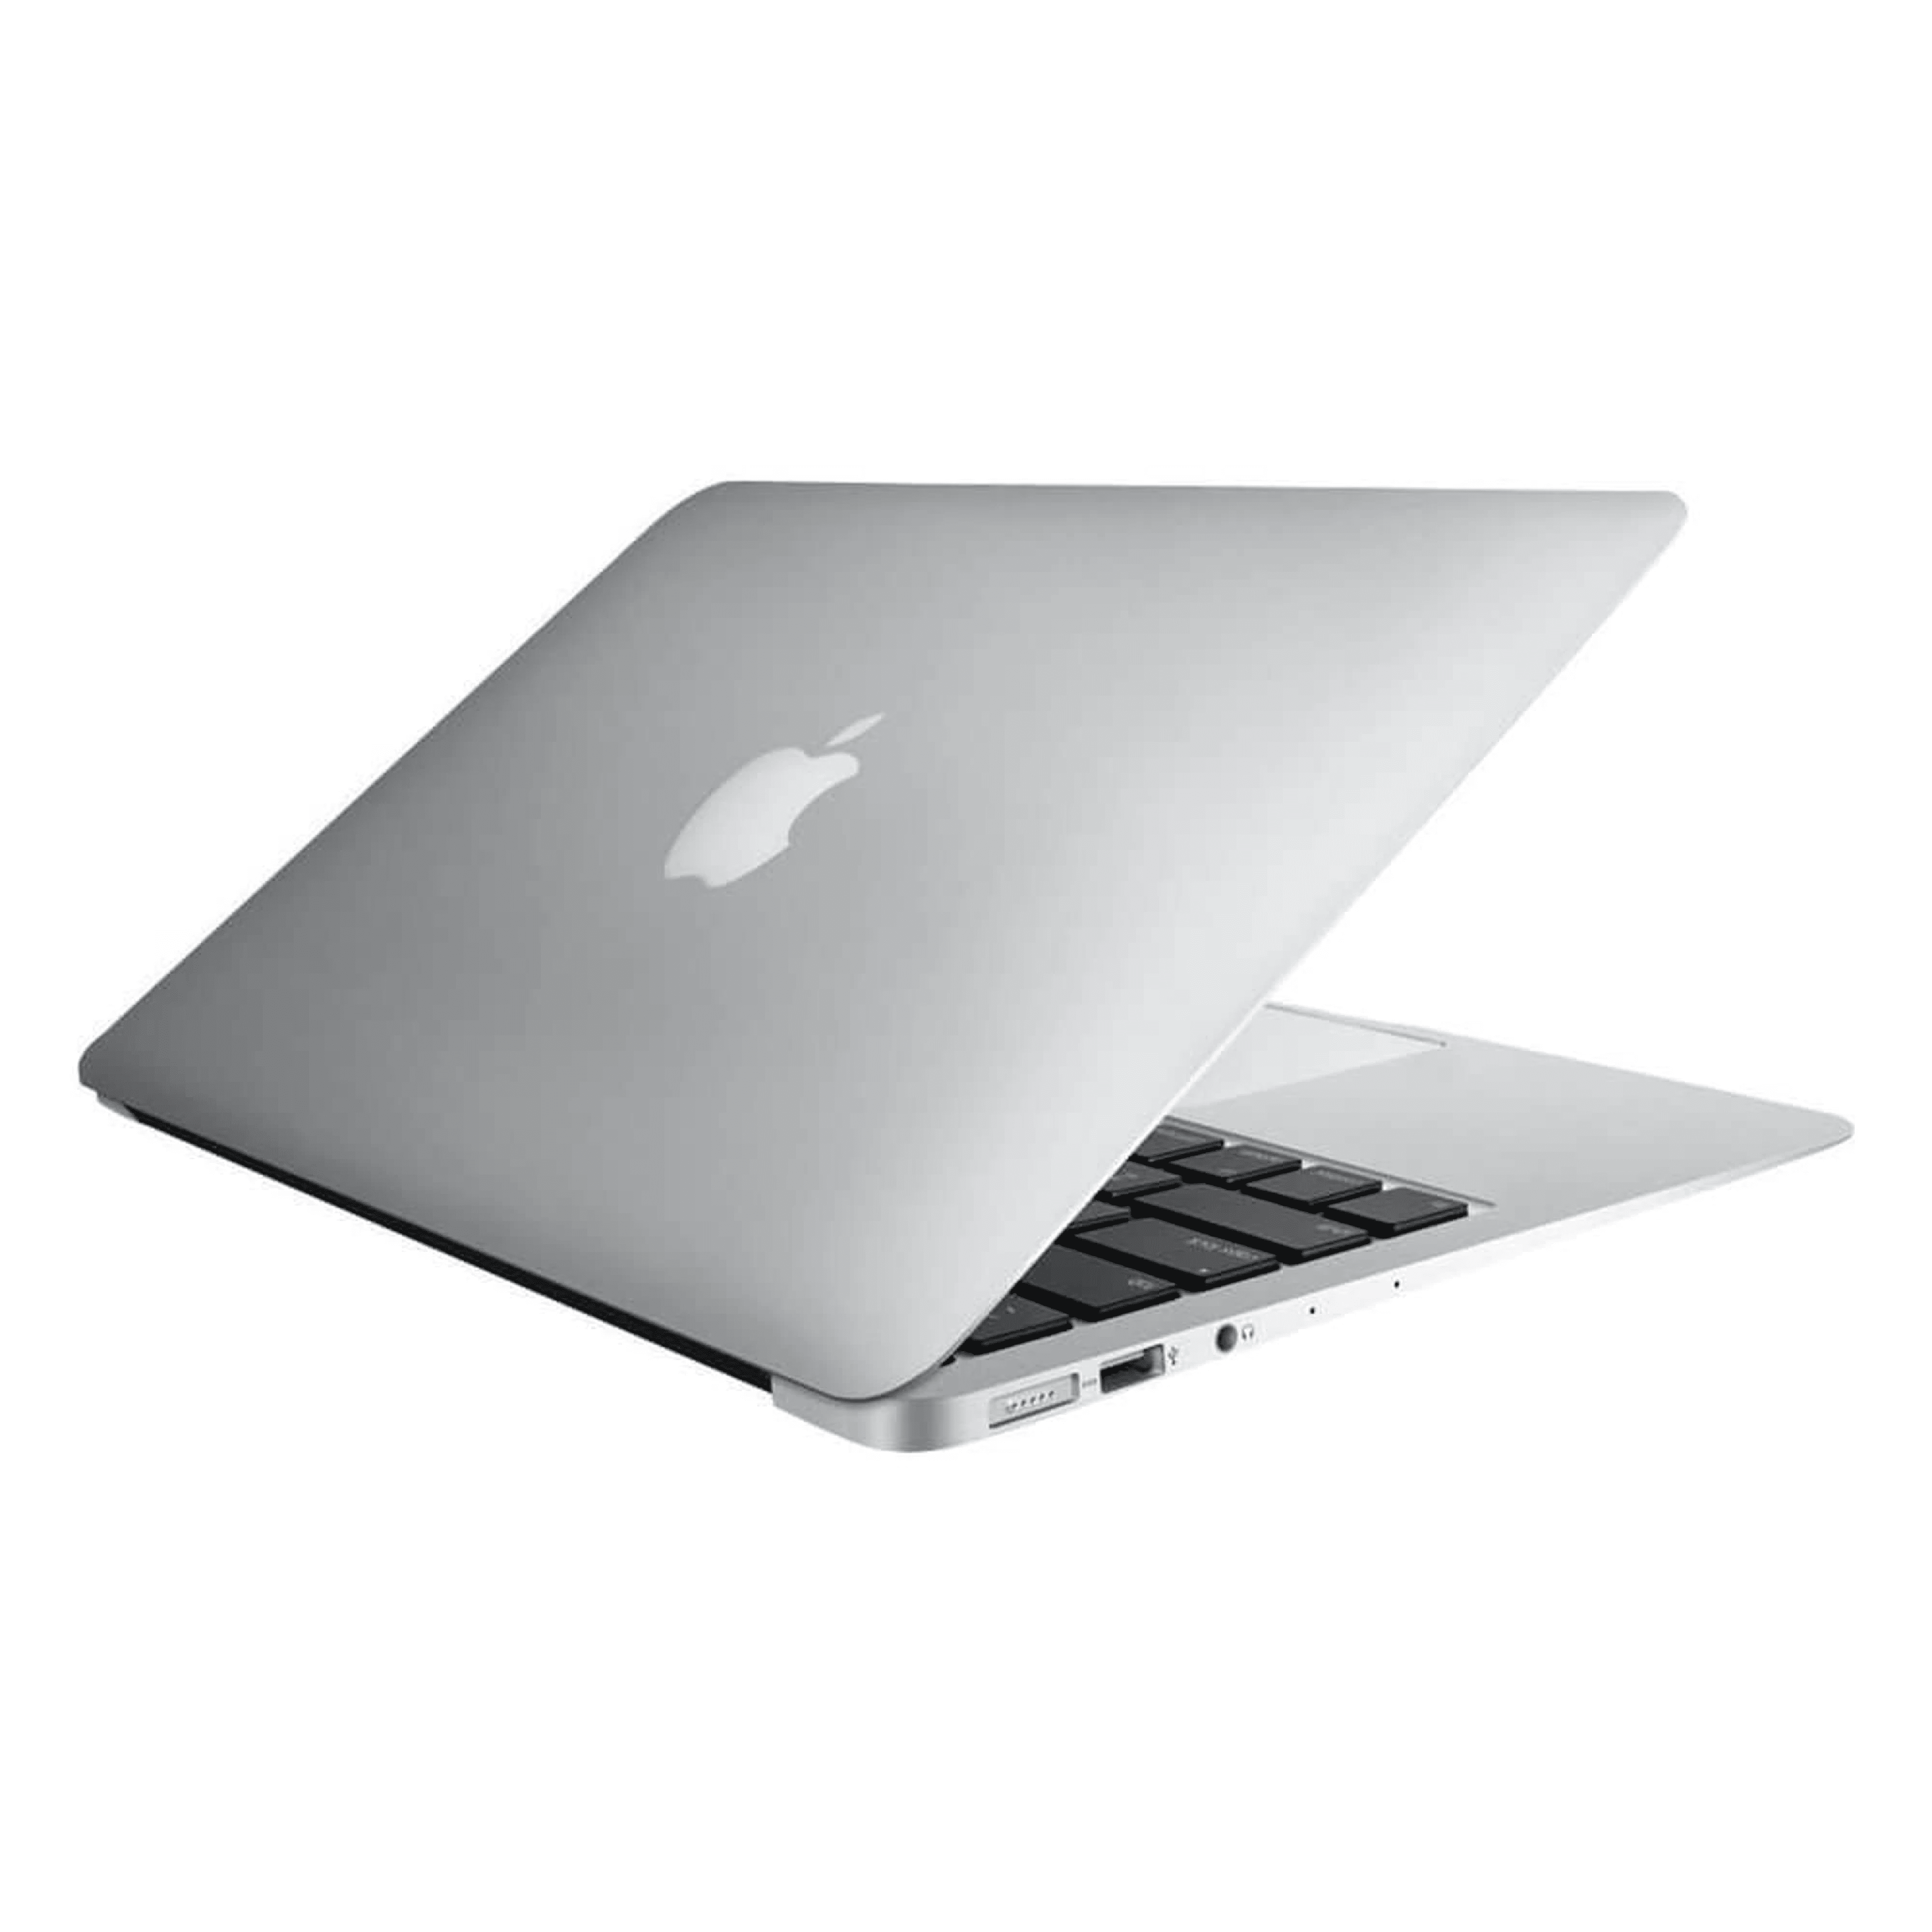 Restored | Apple MacBook Air | 11.6-inch | 4GB RAM 128GB SSD | Intel HD  Graphics | Bundle: Black Case, Wireless Mouse, Bluetooth/Wireless Airbuds  By 